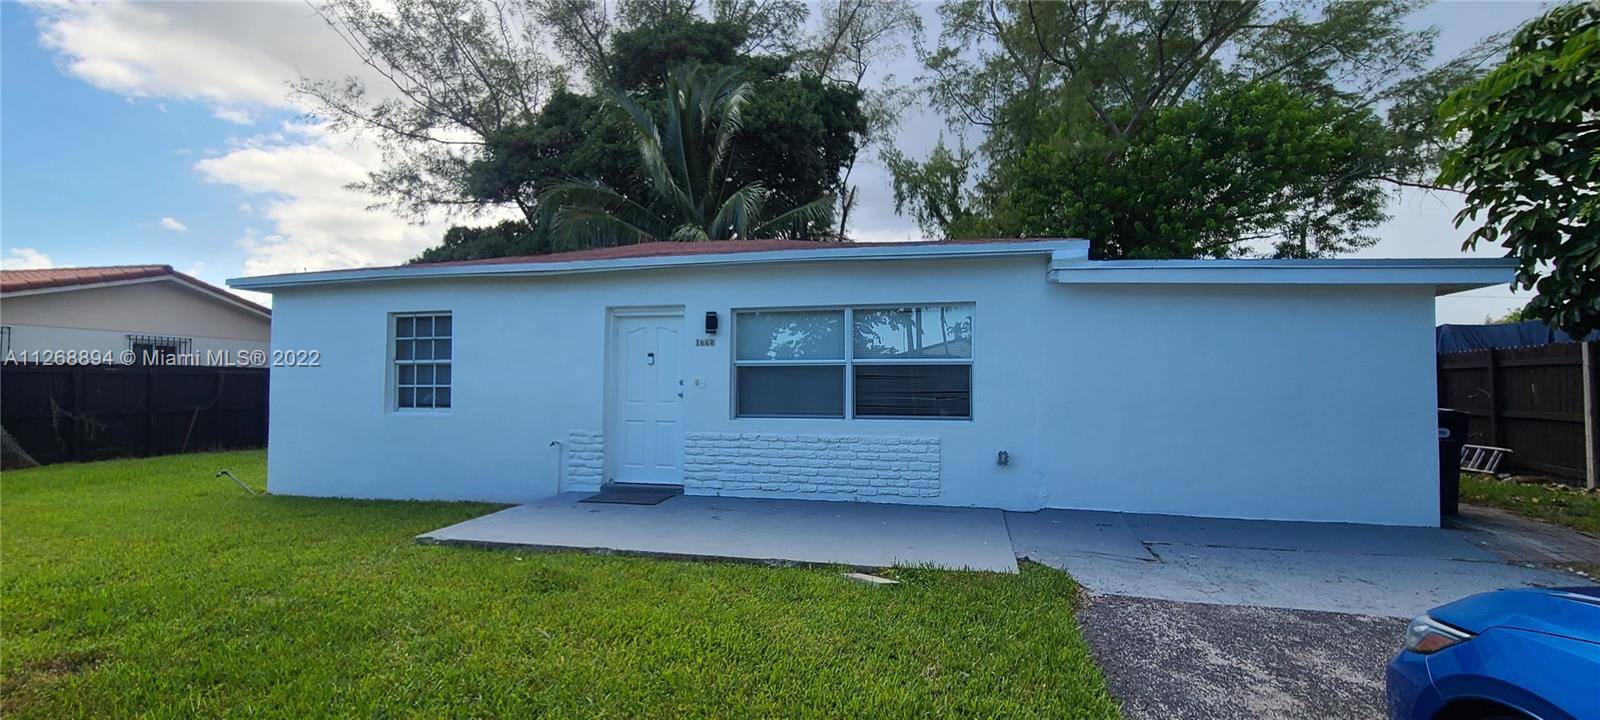 Beautiful single family home 3 bedrooms, 2 bathrooms remodeled, located in one of the most desirable areas in West Miami Westchester.